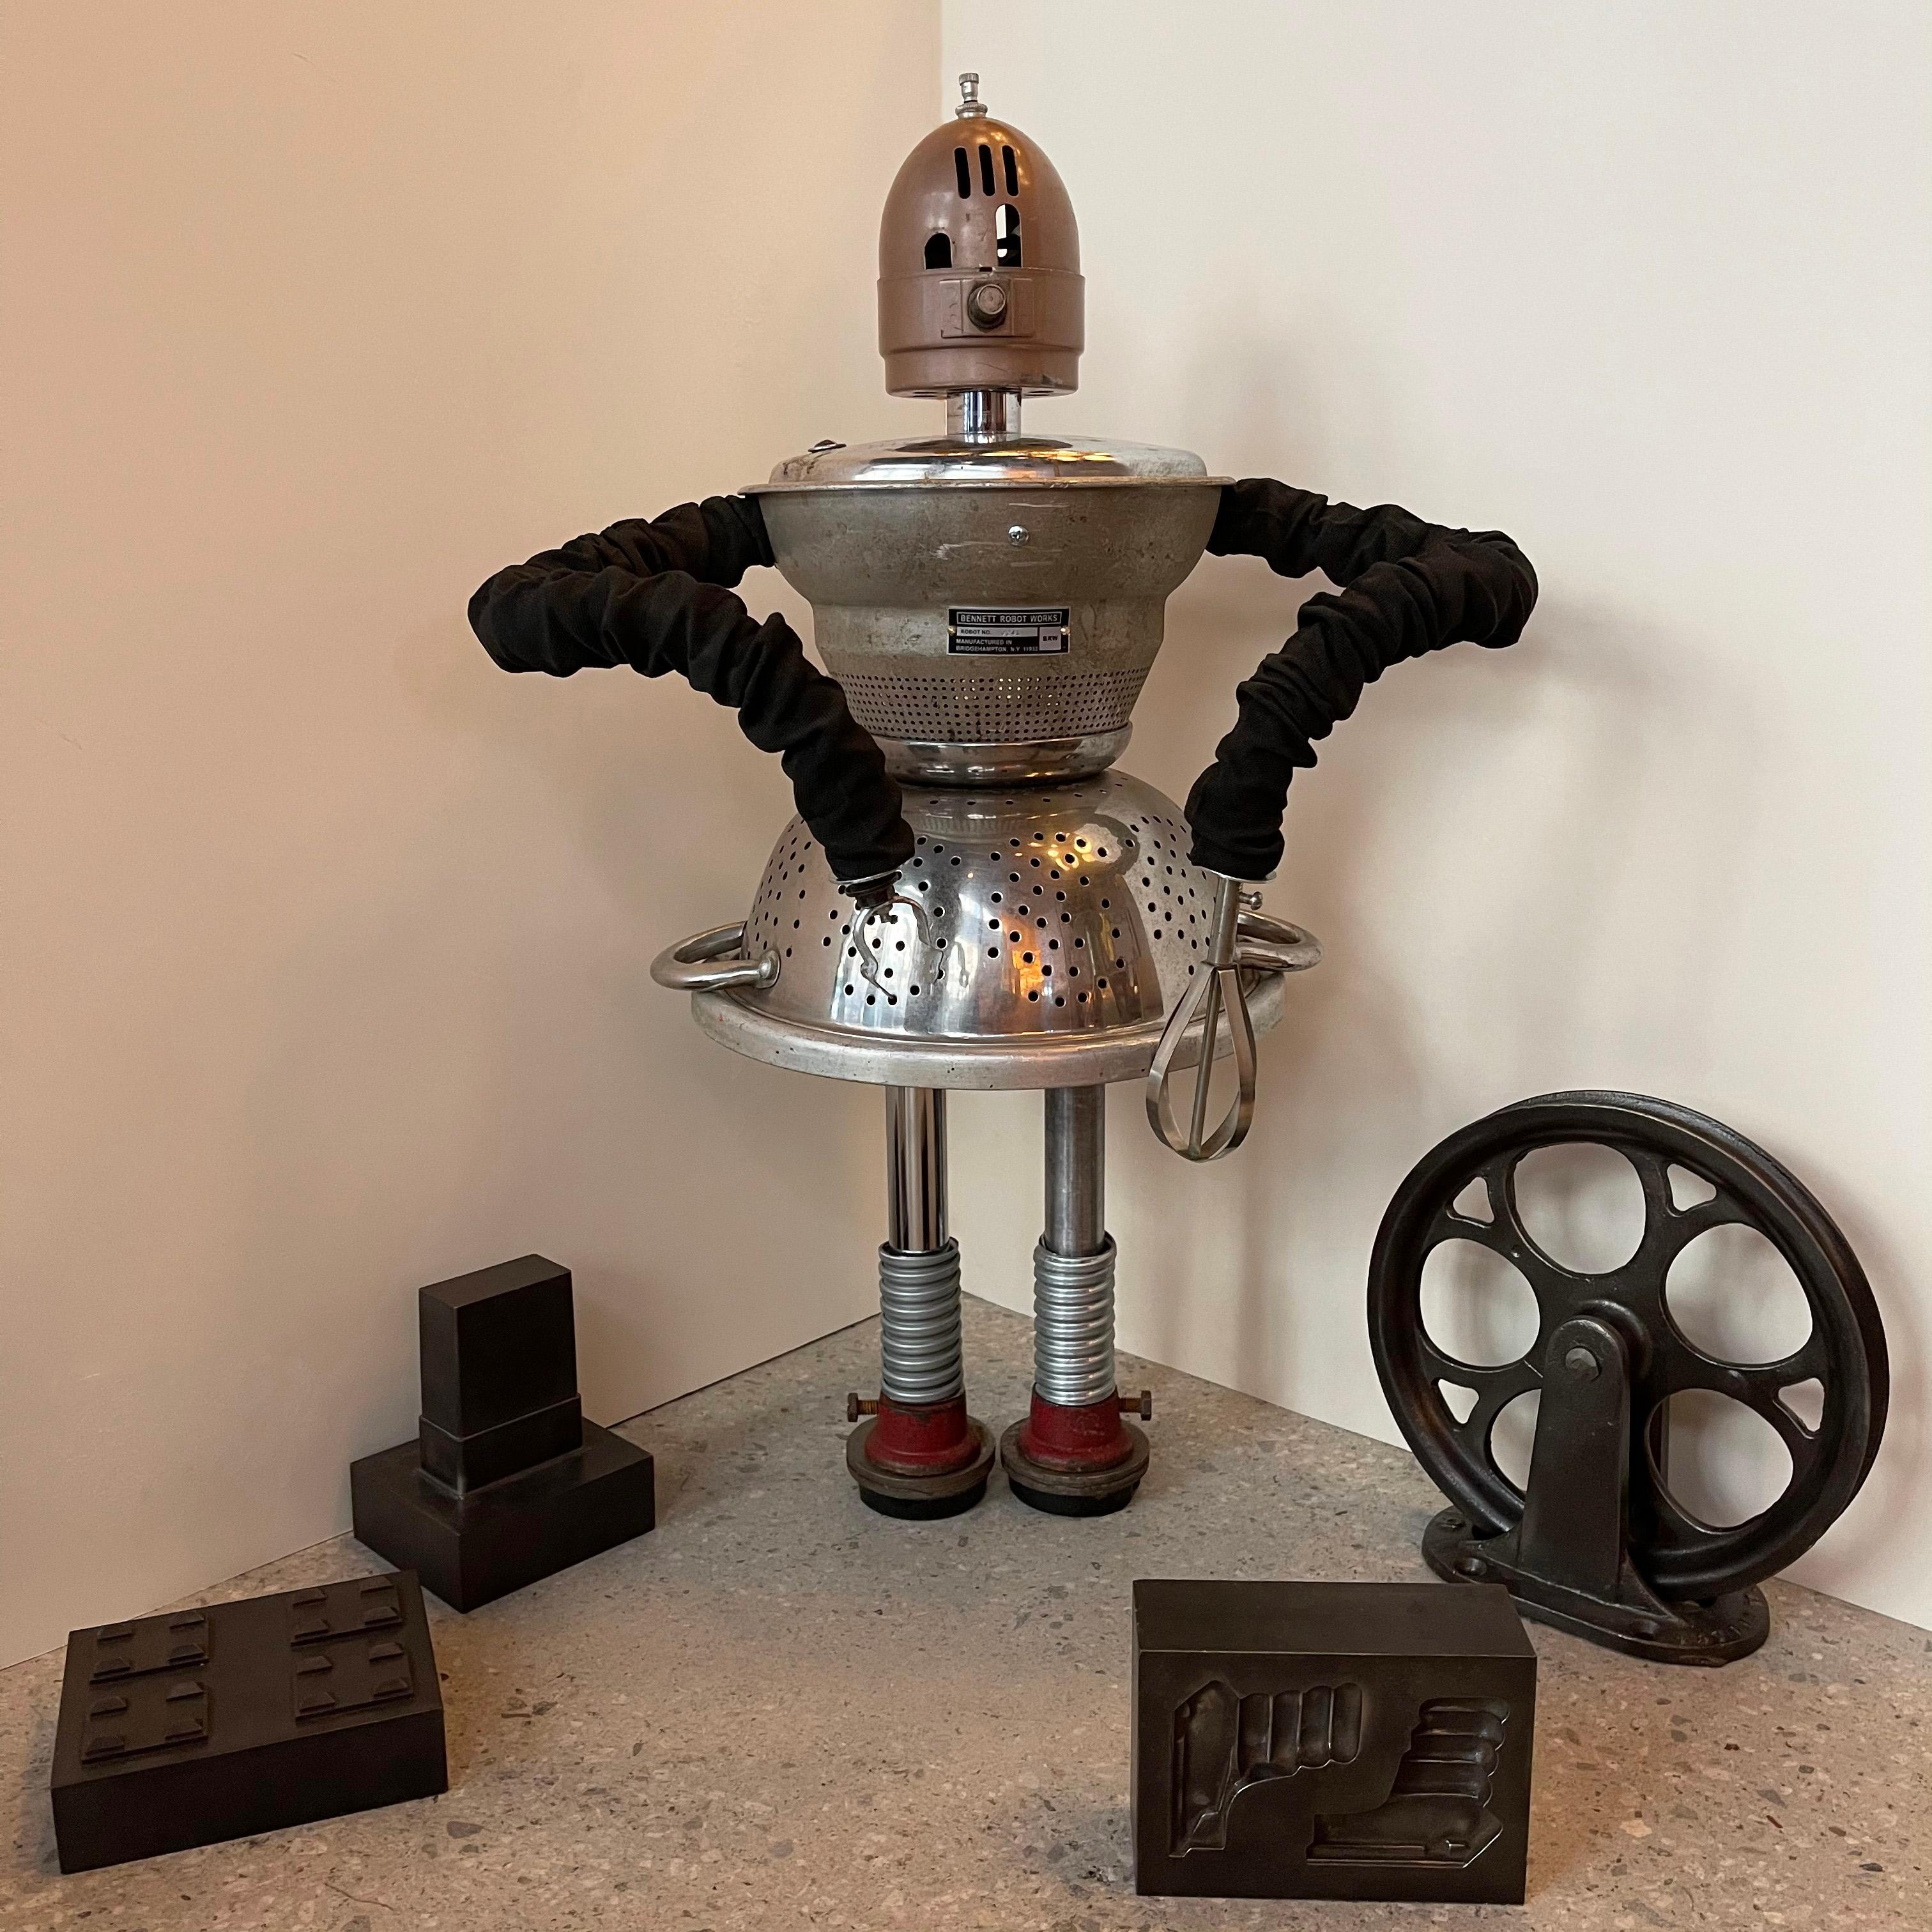 Custom robot sculpture named Chef by Bennett Robot Works, Brooklyn, NY

Bennett Robot Works, robot sculptures created by Gordon Bennett, are composed of found, vintage objects used in their unaltered entirety. They are inspired by Norman Bel